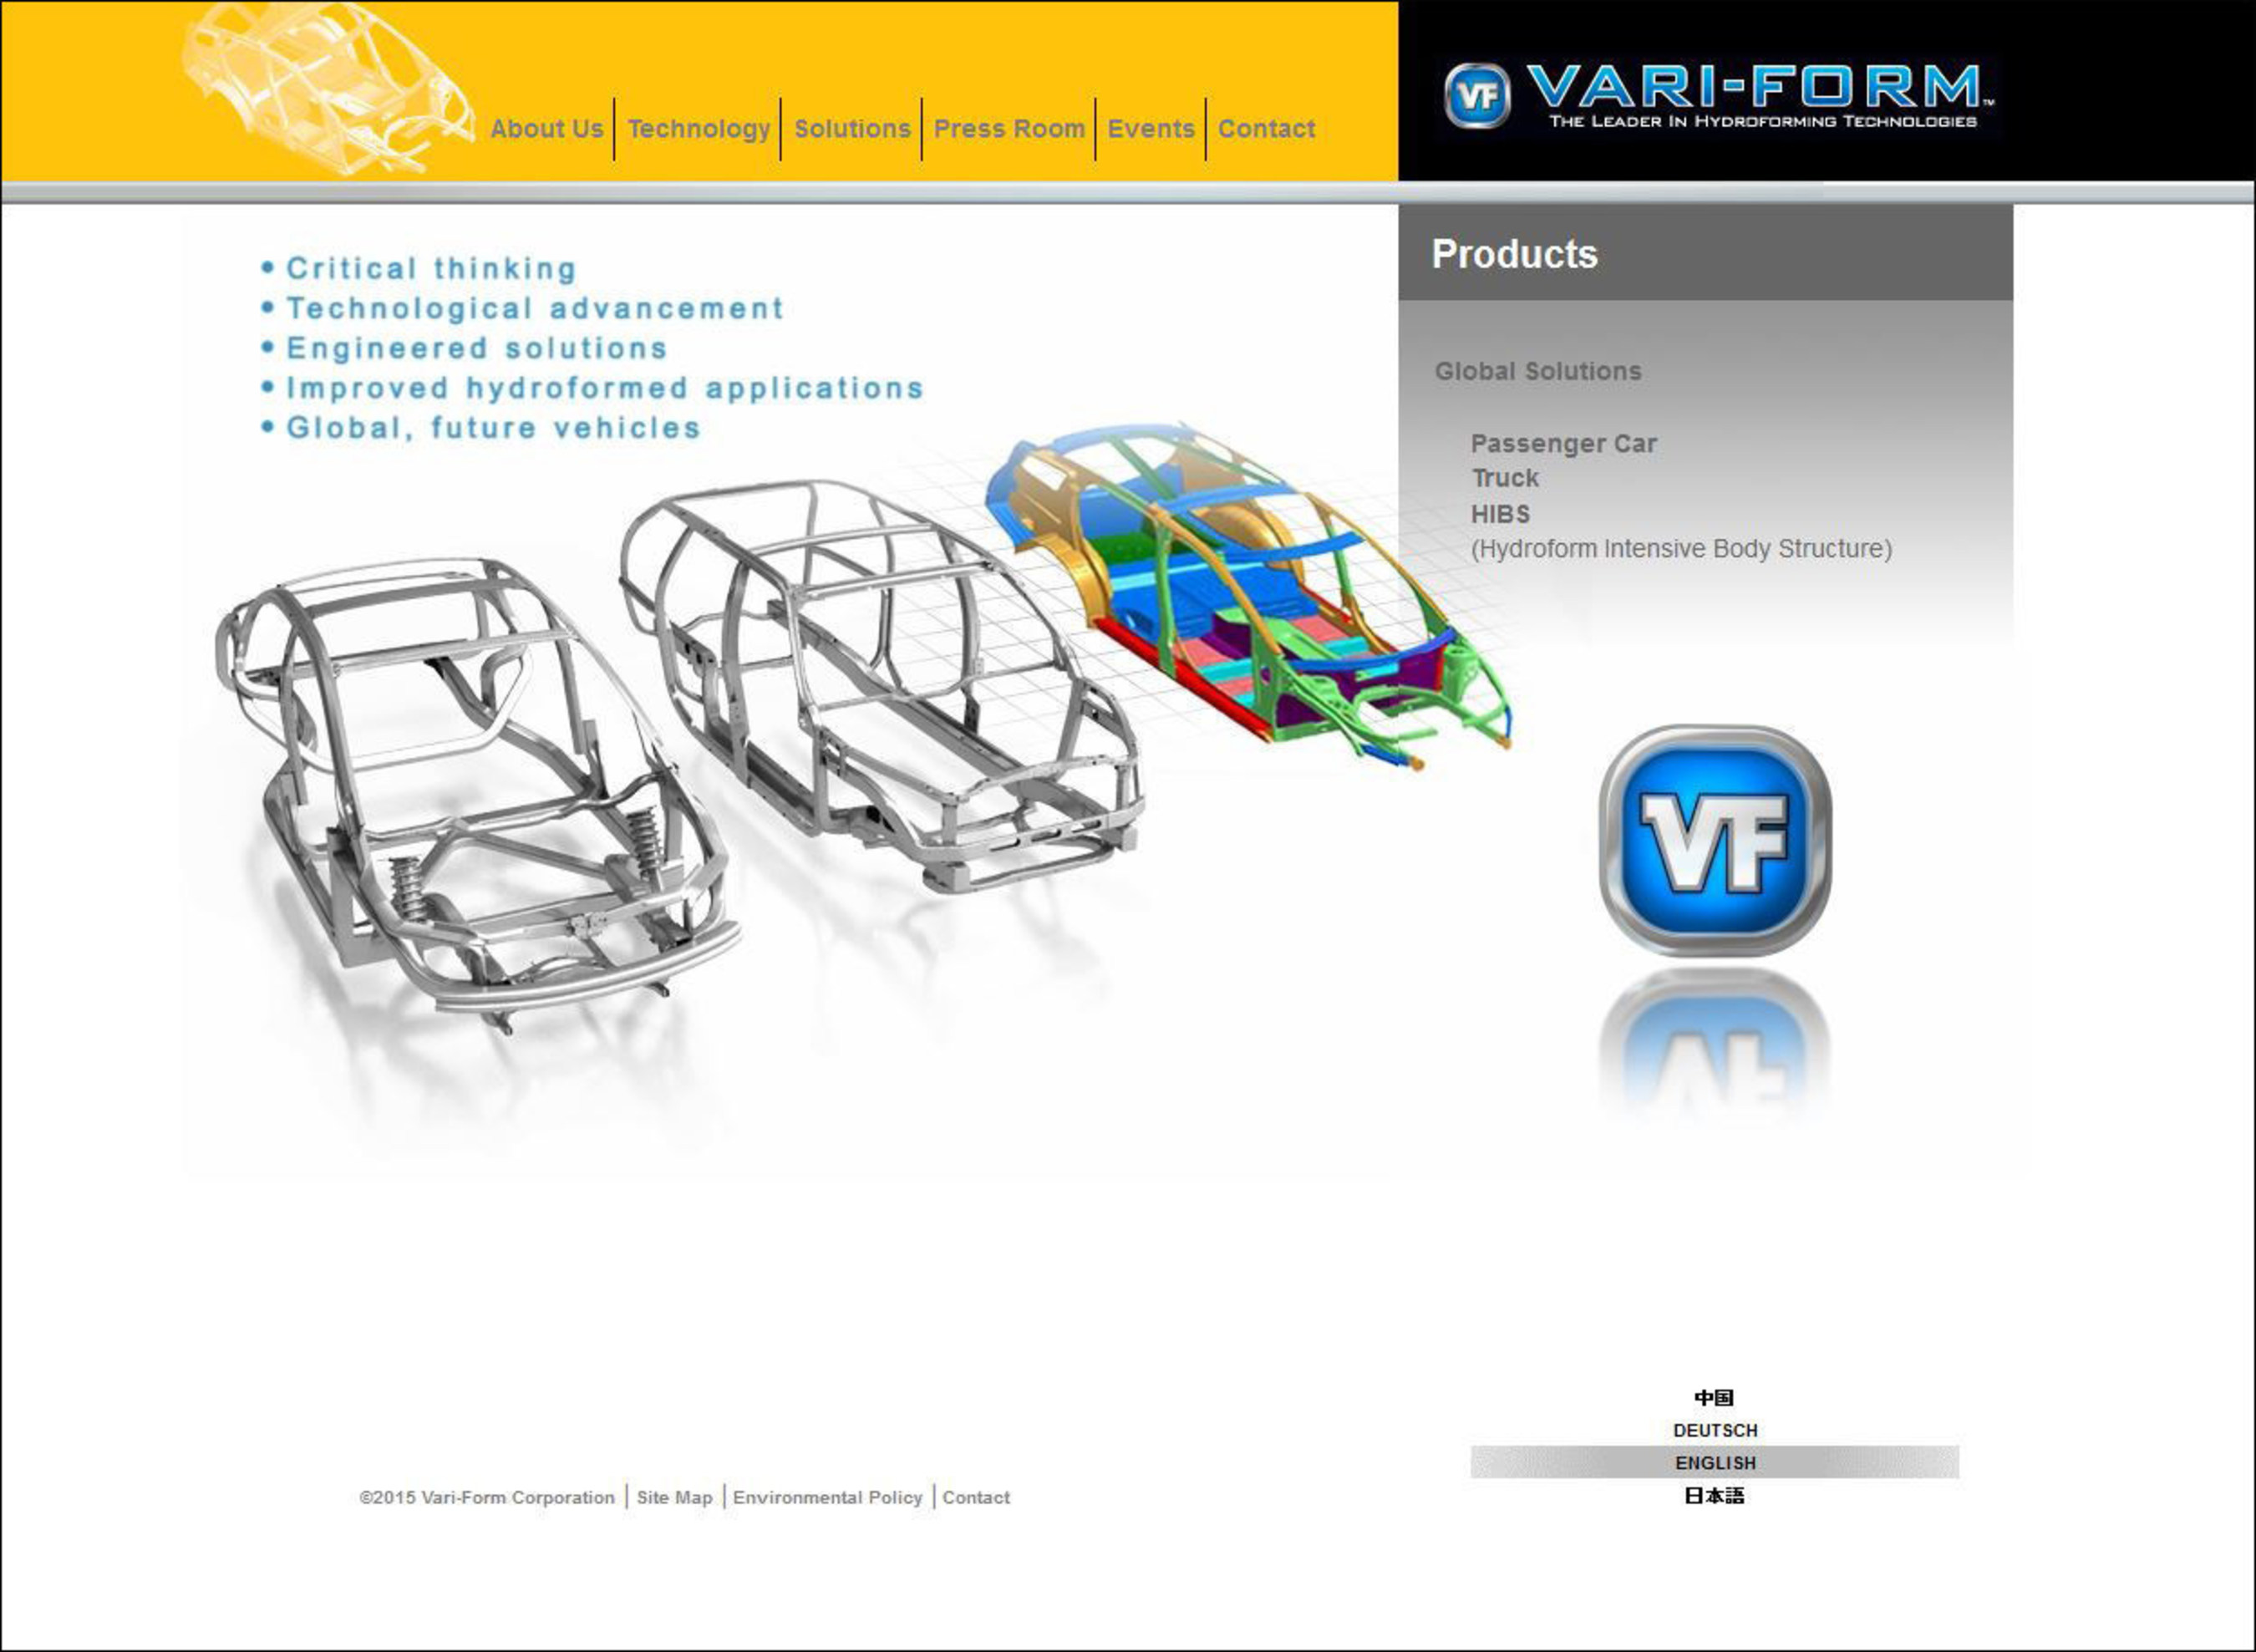 The Solutions/Products department of the new Vari-Form web site makes it easy for visitors to focus on their specific needs - passenger car or truck - as well as Hydroform-Intensive Body Structures (HIBS) technology, which has multiple applications.